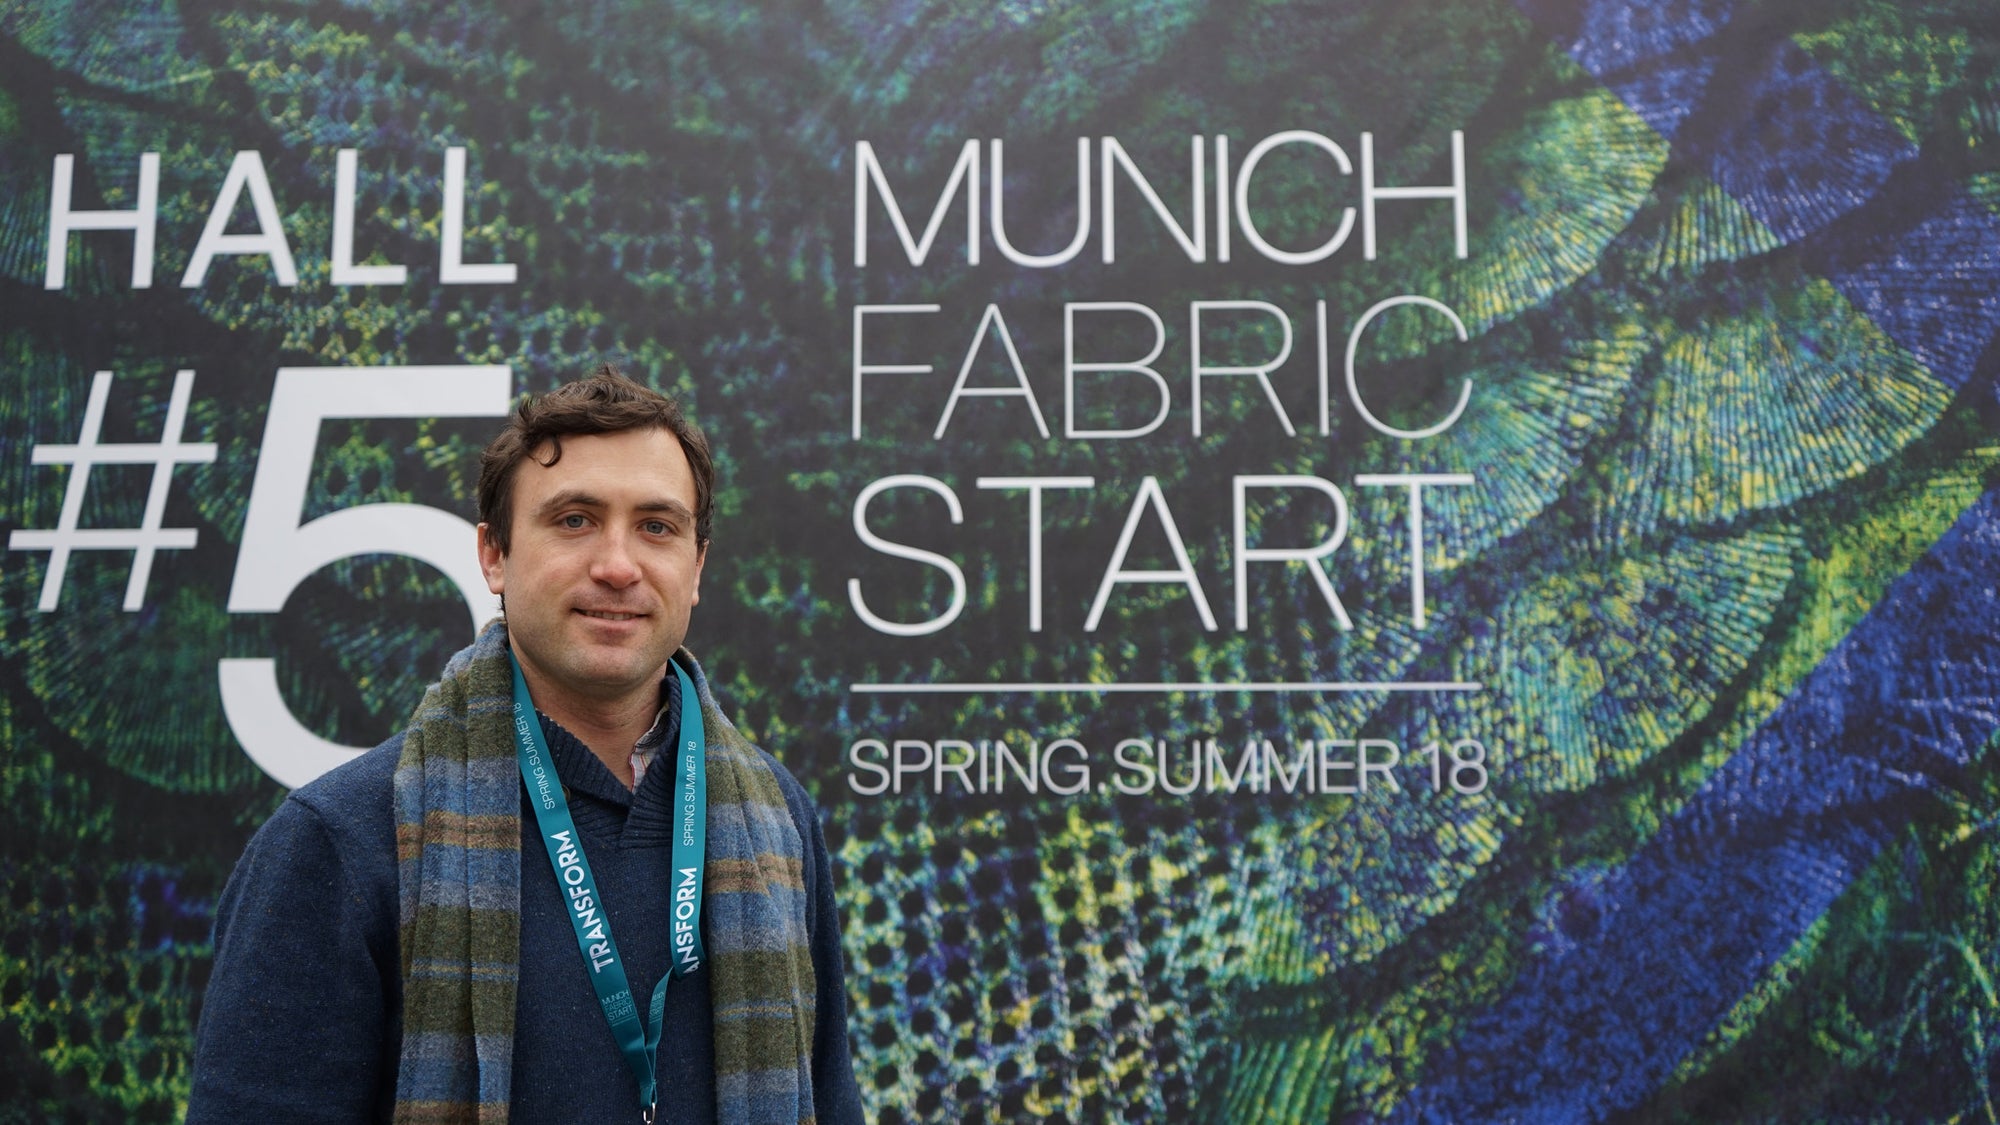 Robert W. Stolz pictured at the Munich Fabric Start on February 1st, 2017 in Munich, Germany standing in front of the Munich Fabric Start display